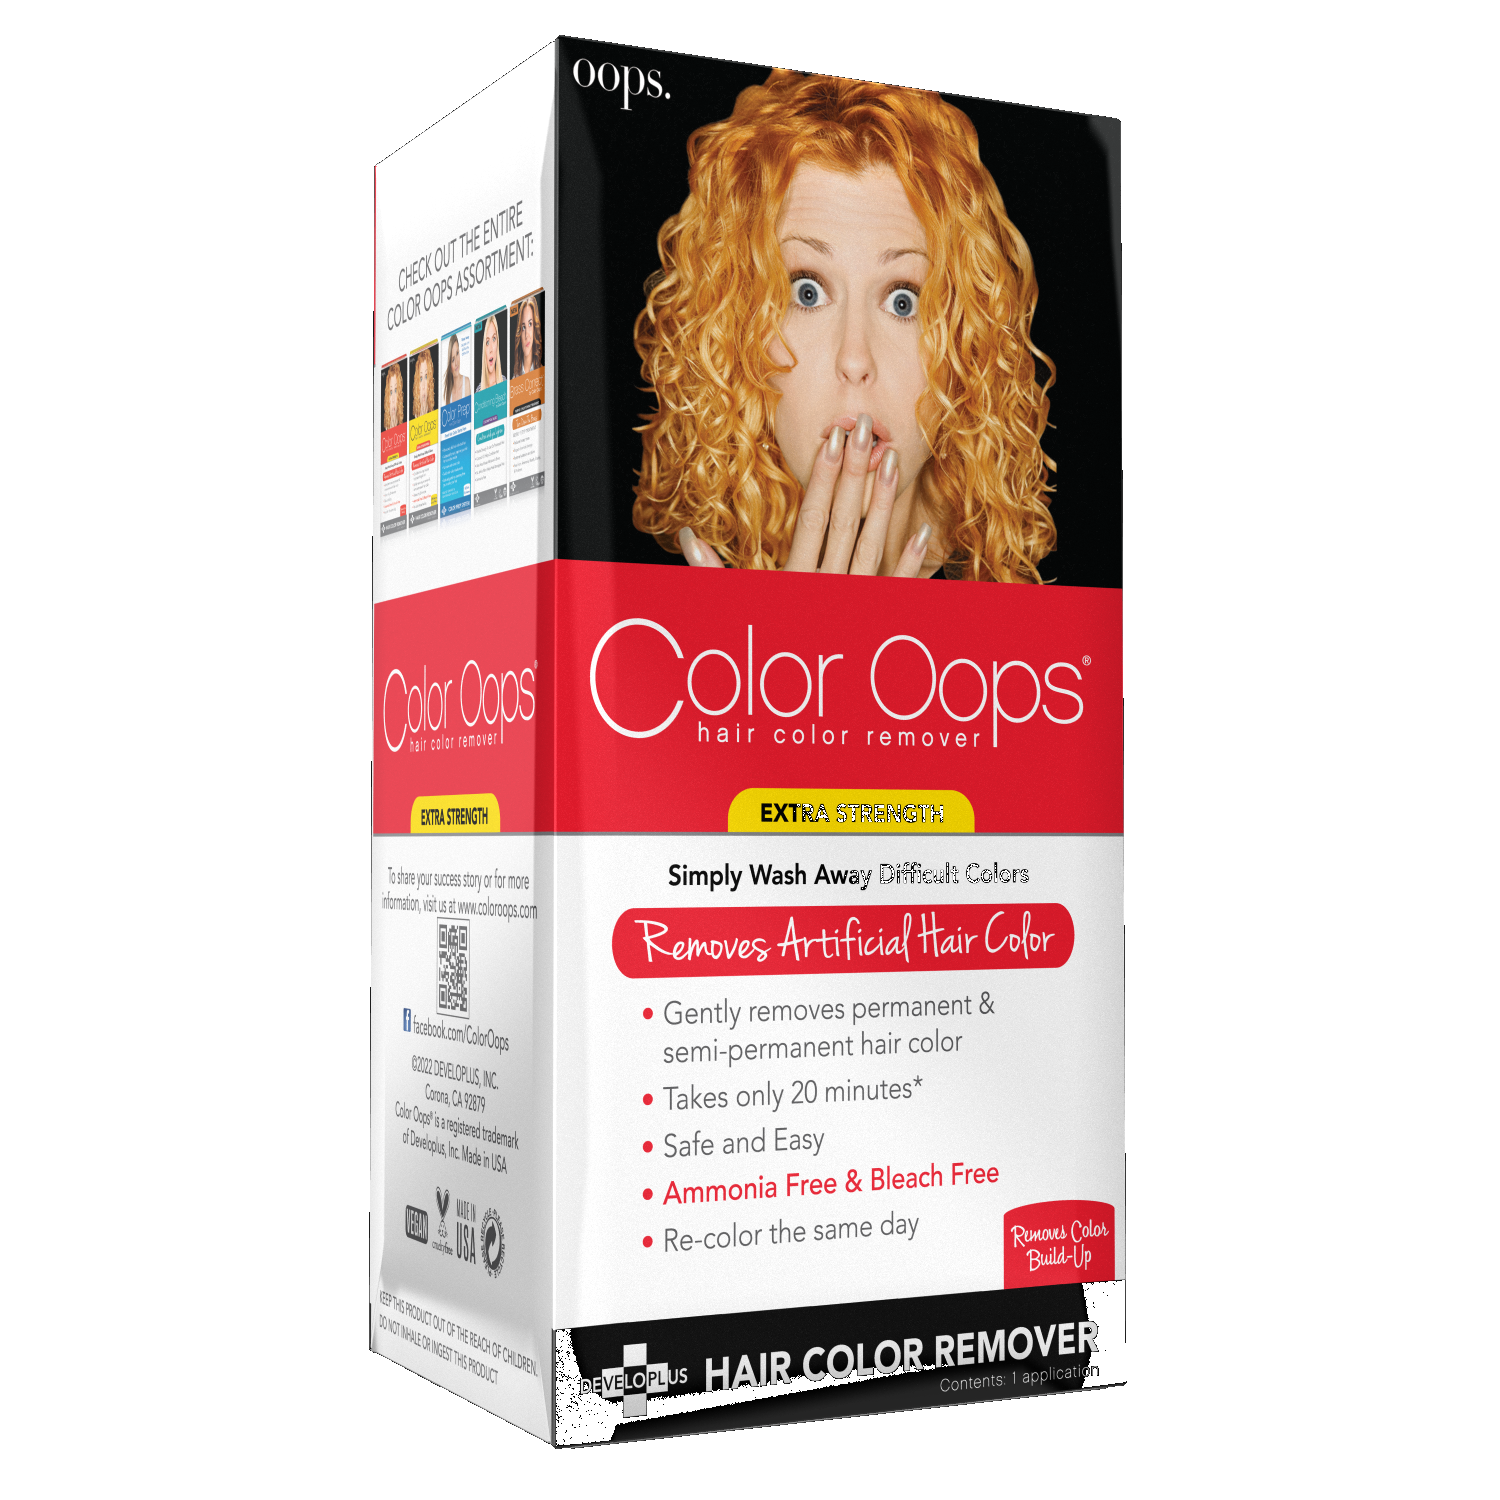 Why Colour Remover is The Product of the Decade  Colour remover, Hair color  remover, Removing permanent hair color